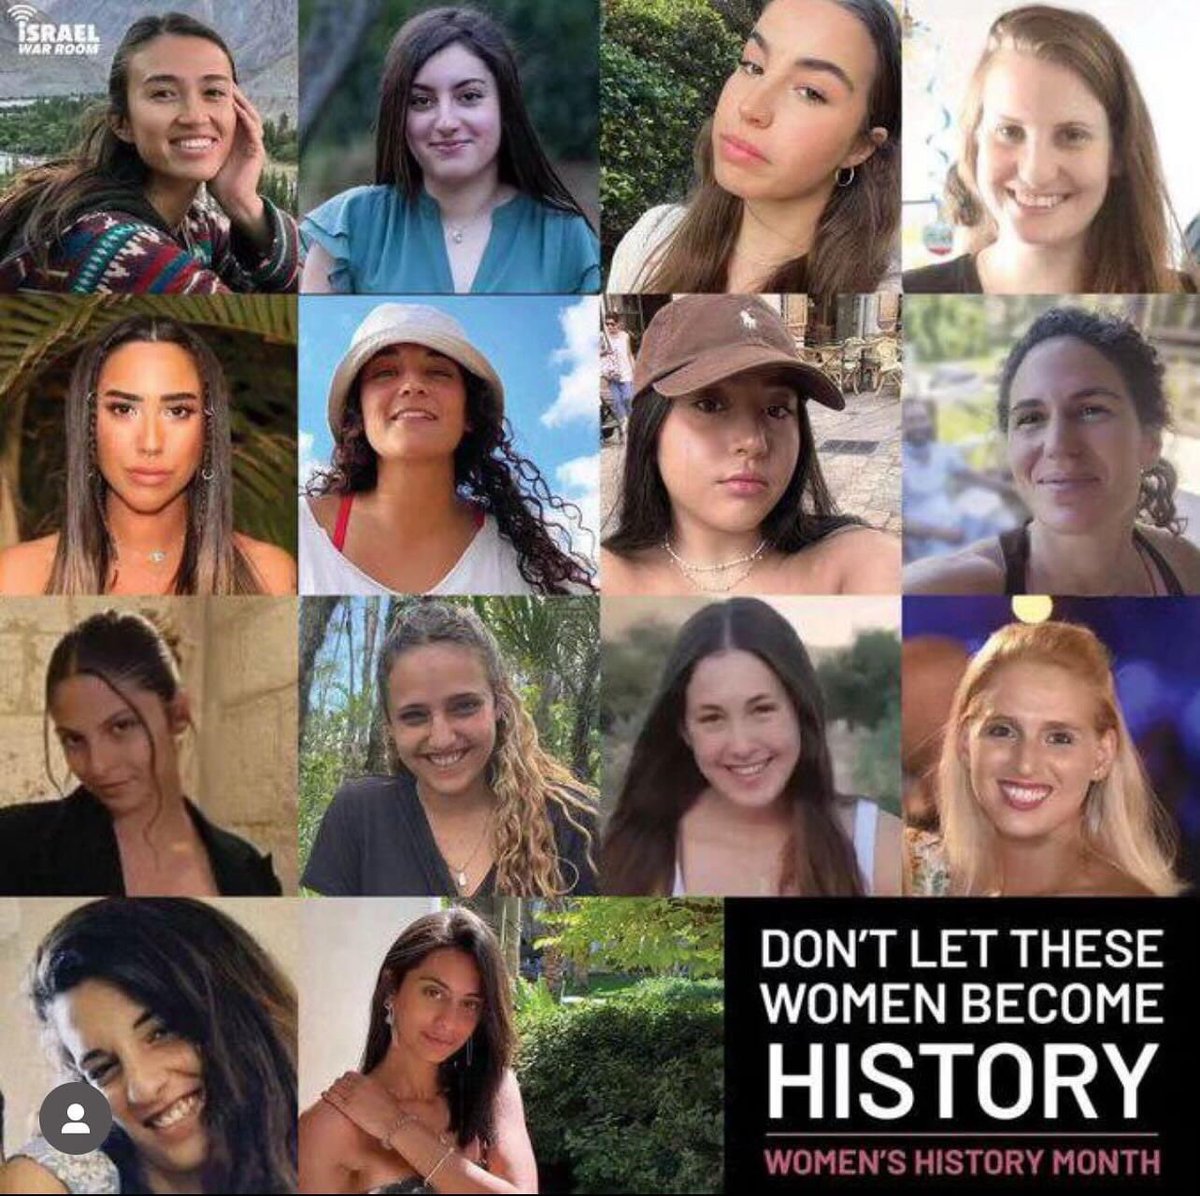 March is Women’s history month. On March 8 we celebrate International Women’s Day. 

Jewish Women matter too! 🎗️ Bring her home! Bring them all home 🎗️

#jewishwomen #bringthemhome #hostages #jewish #israel #internationalwomensday #women #womenshistorymonth